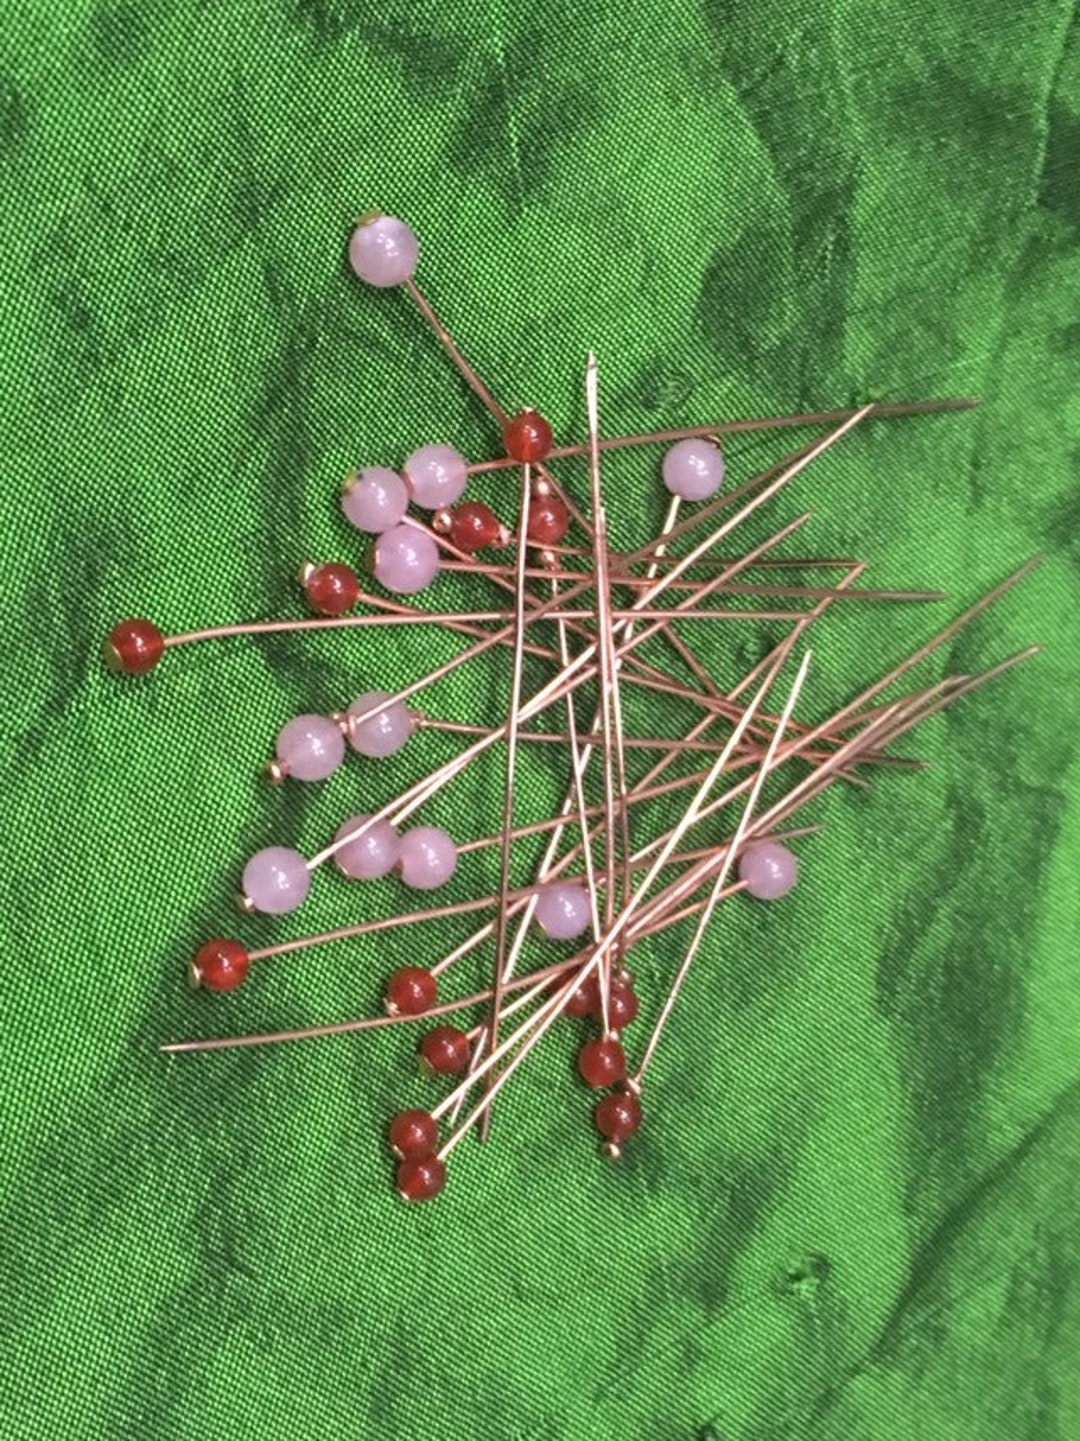 Medieval Brass Pins. Veil Pins. Sewing Pinned Needles. Dress Pins for  Reenactment, SCA, and LARP 